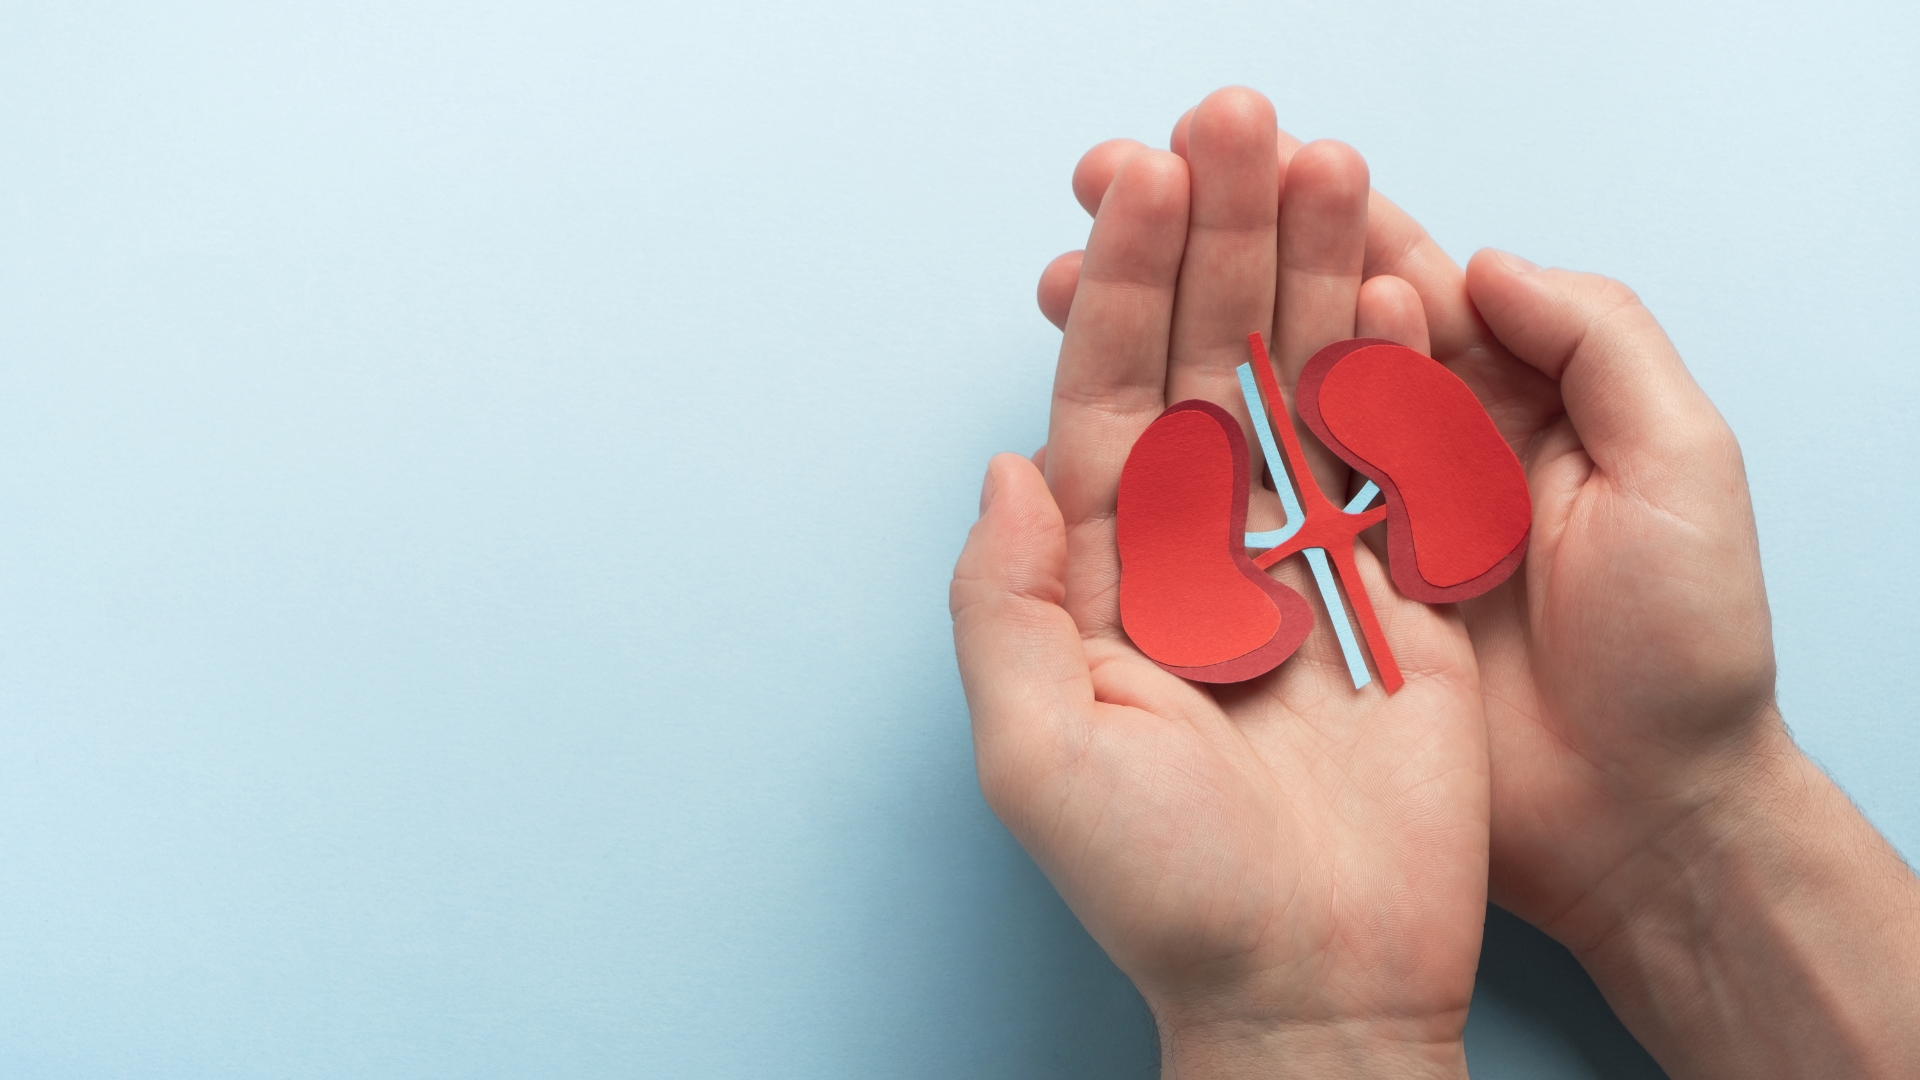 Hands holding a paper cutout of a red kidney on a light blue background.